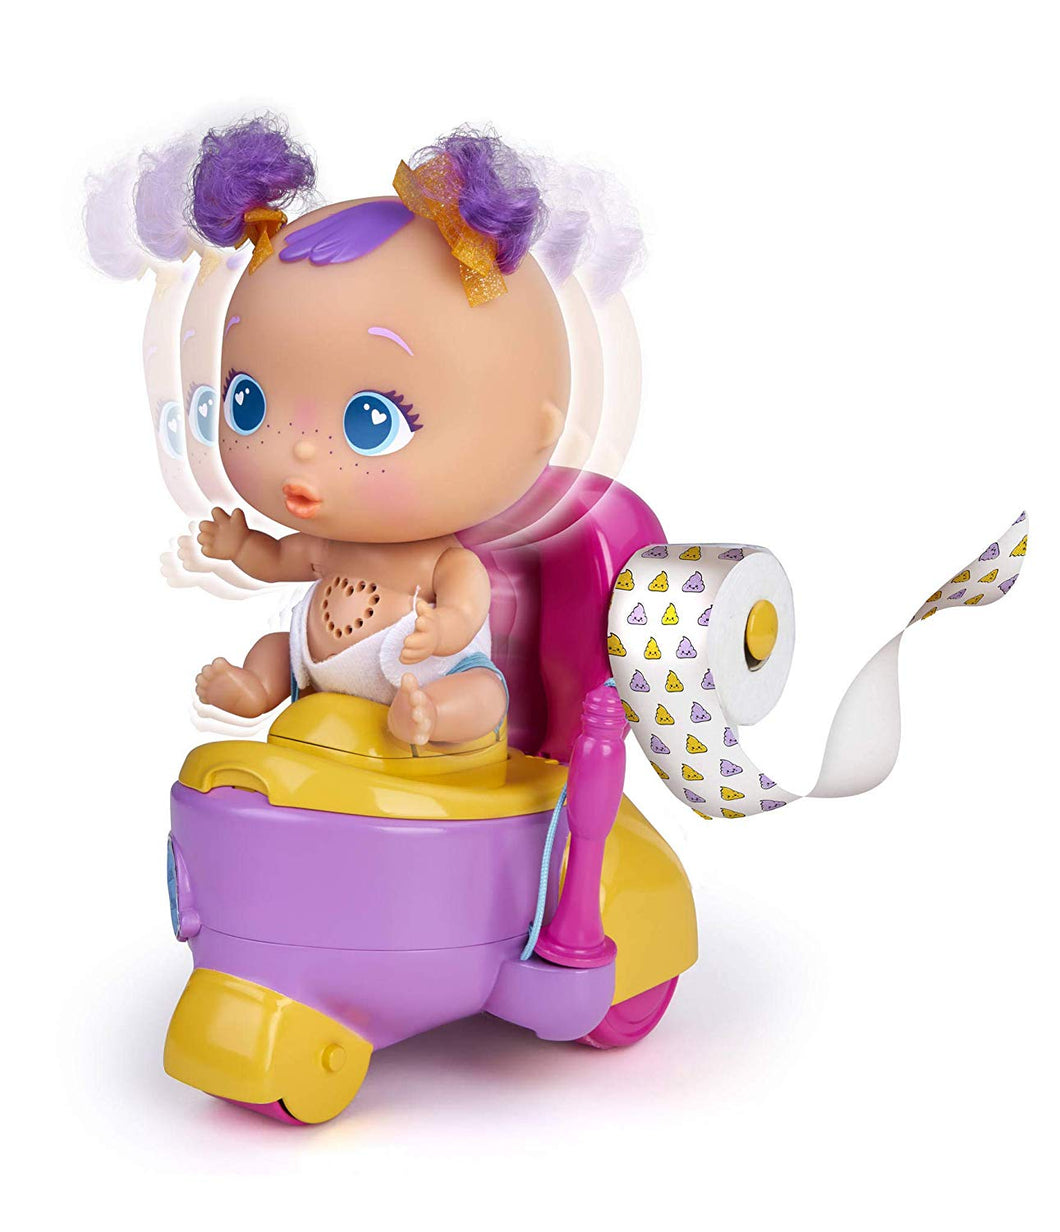 The Bellies Potty Car - Famosa 700015140